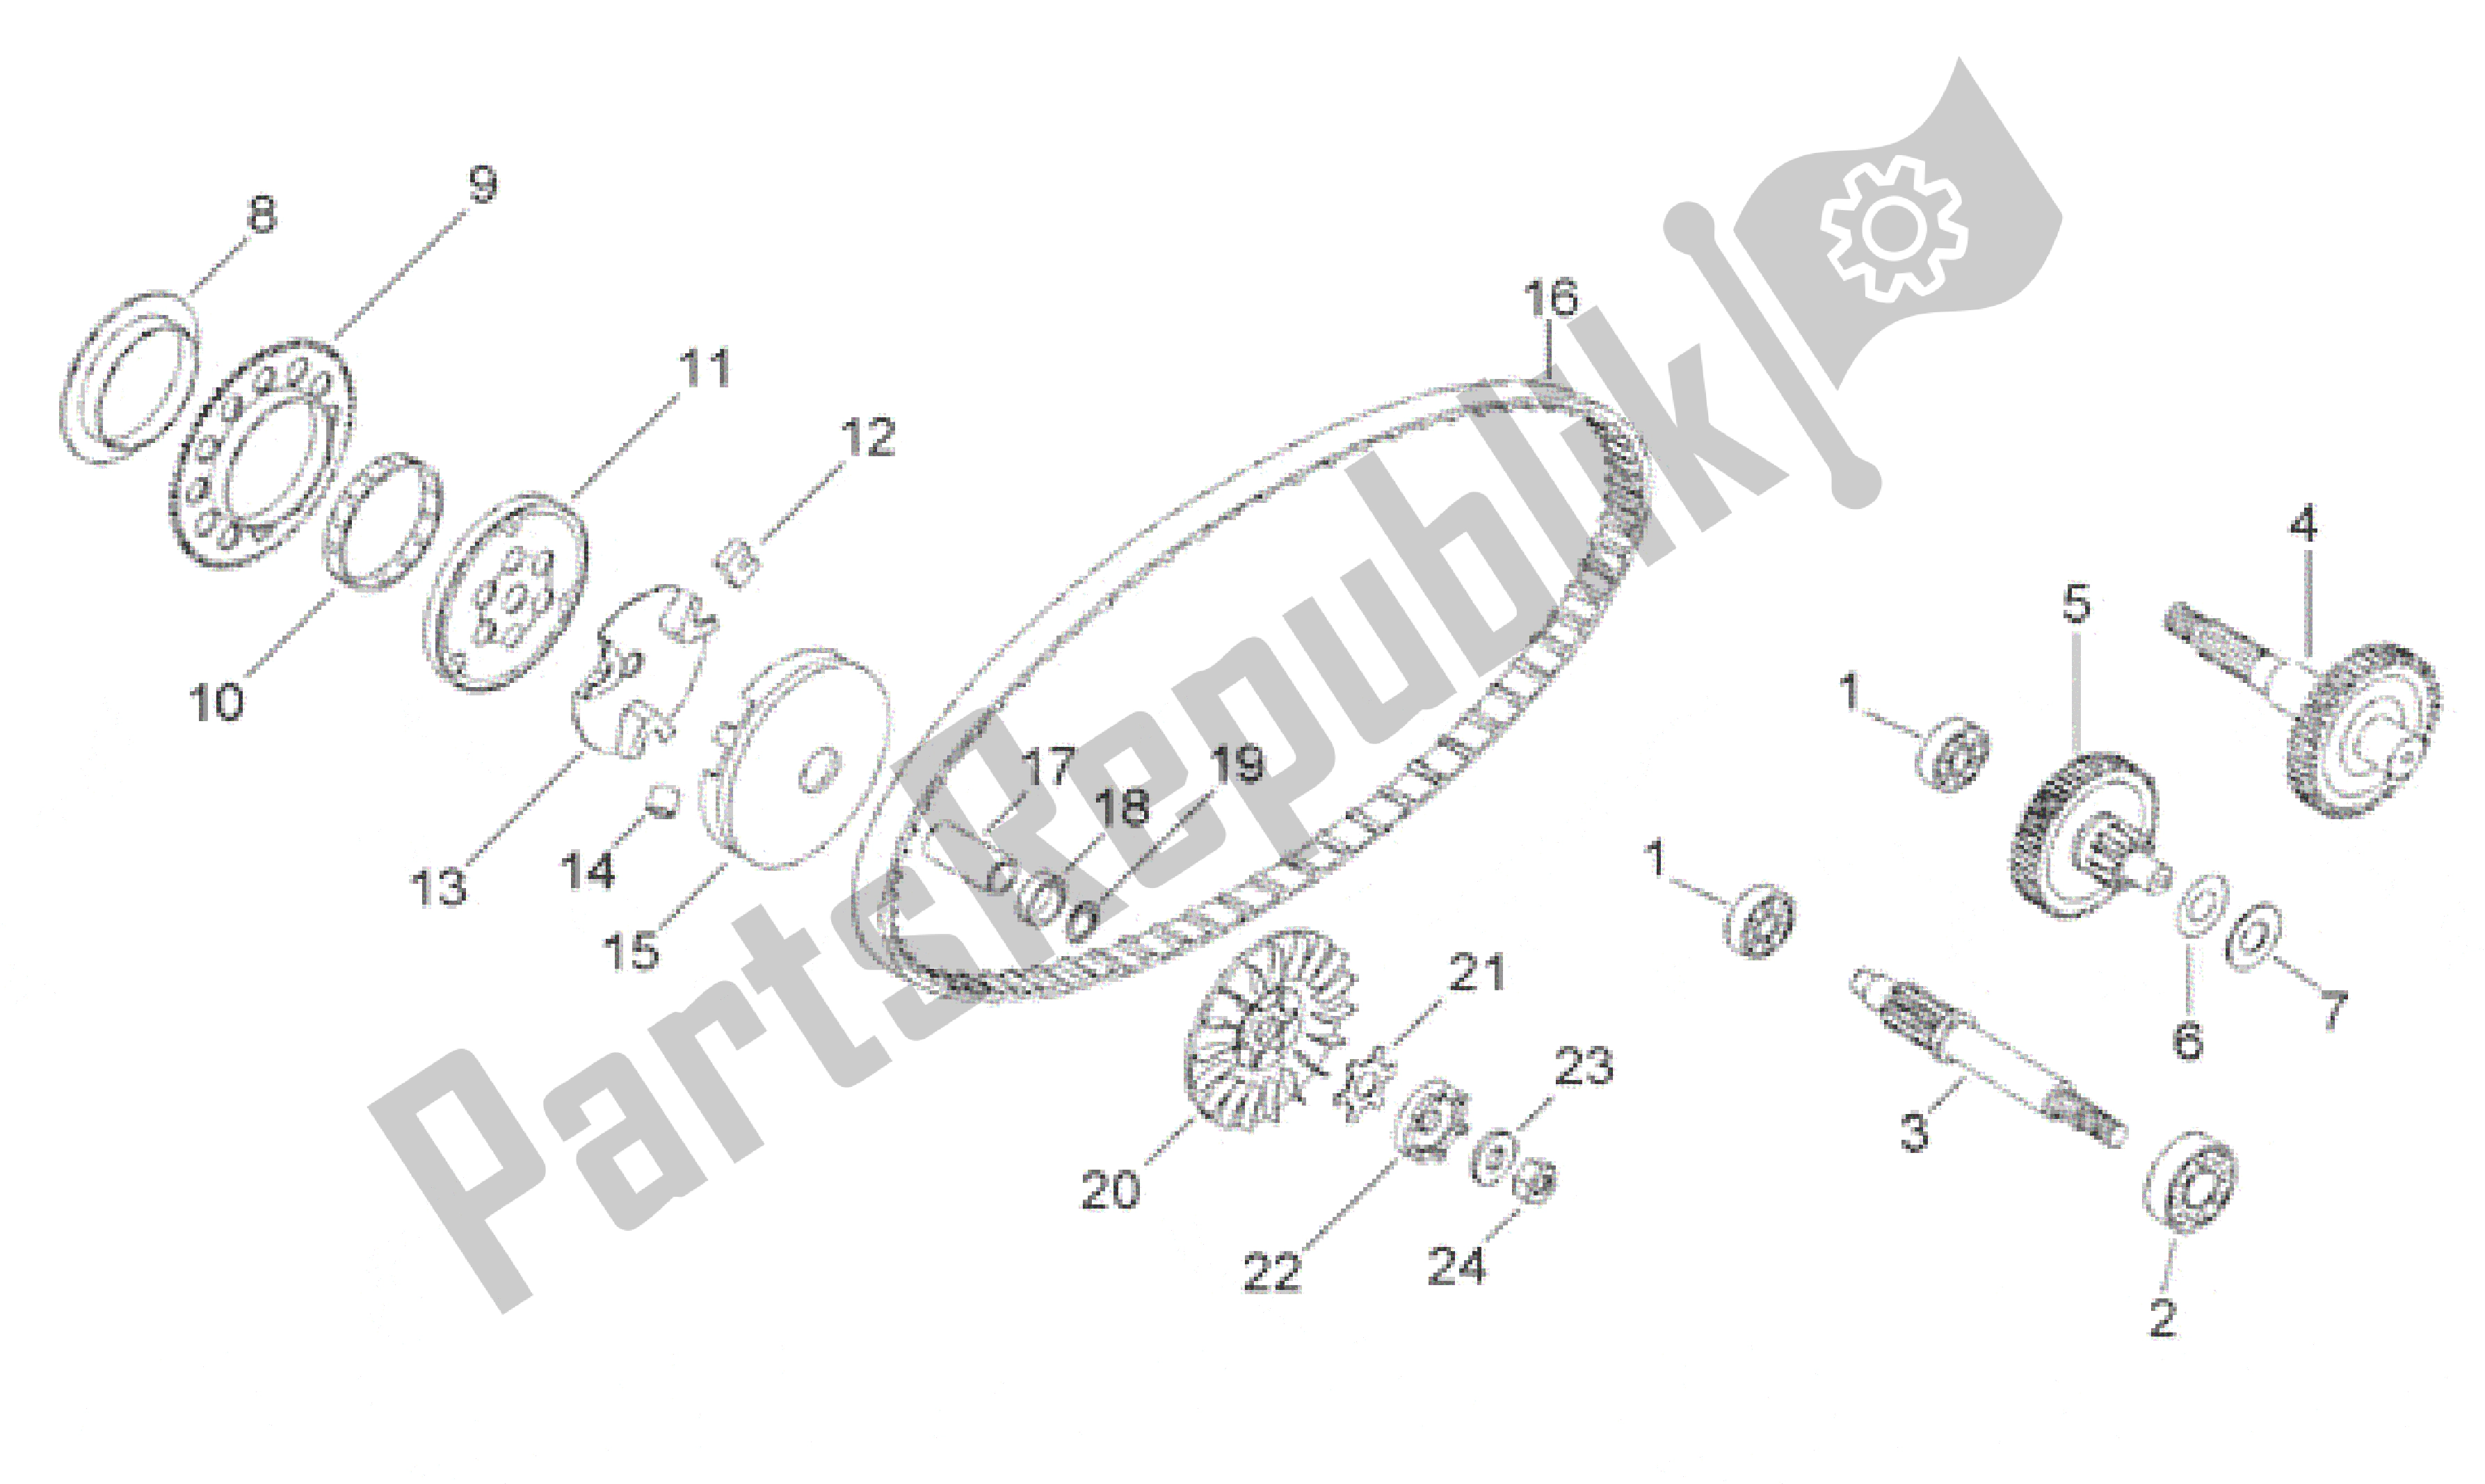 All parts for the Variator - Transmission Final Drive of the Aprilia Scarabeo 50 1993 - 1997